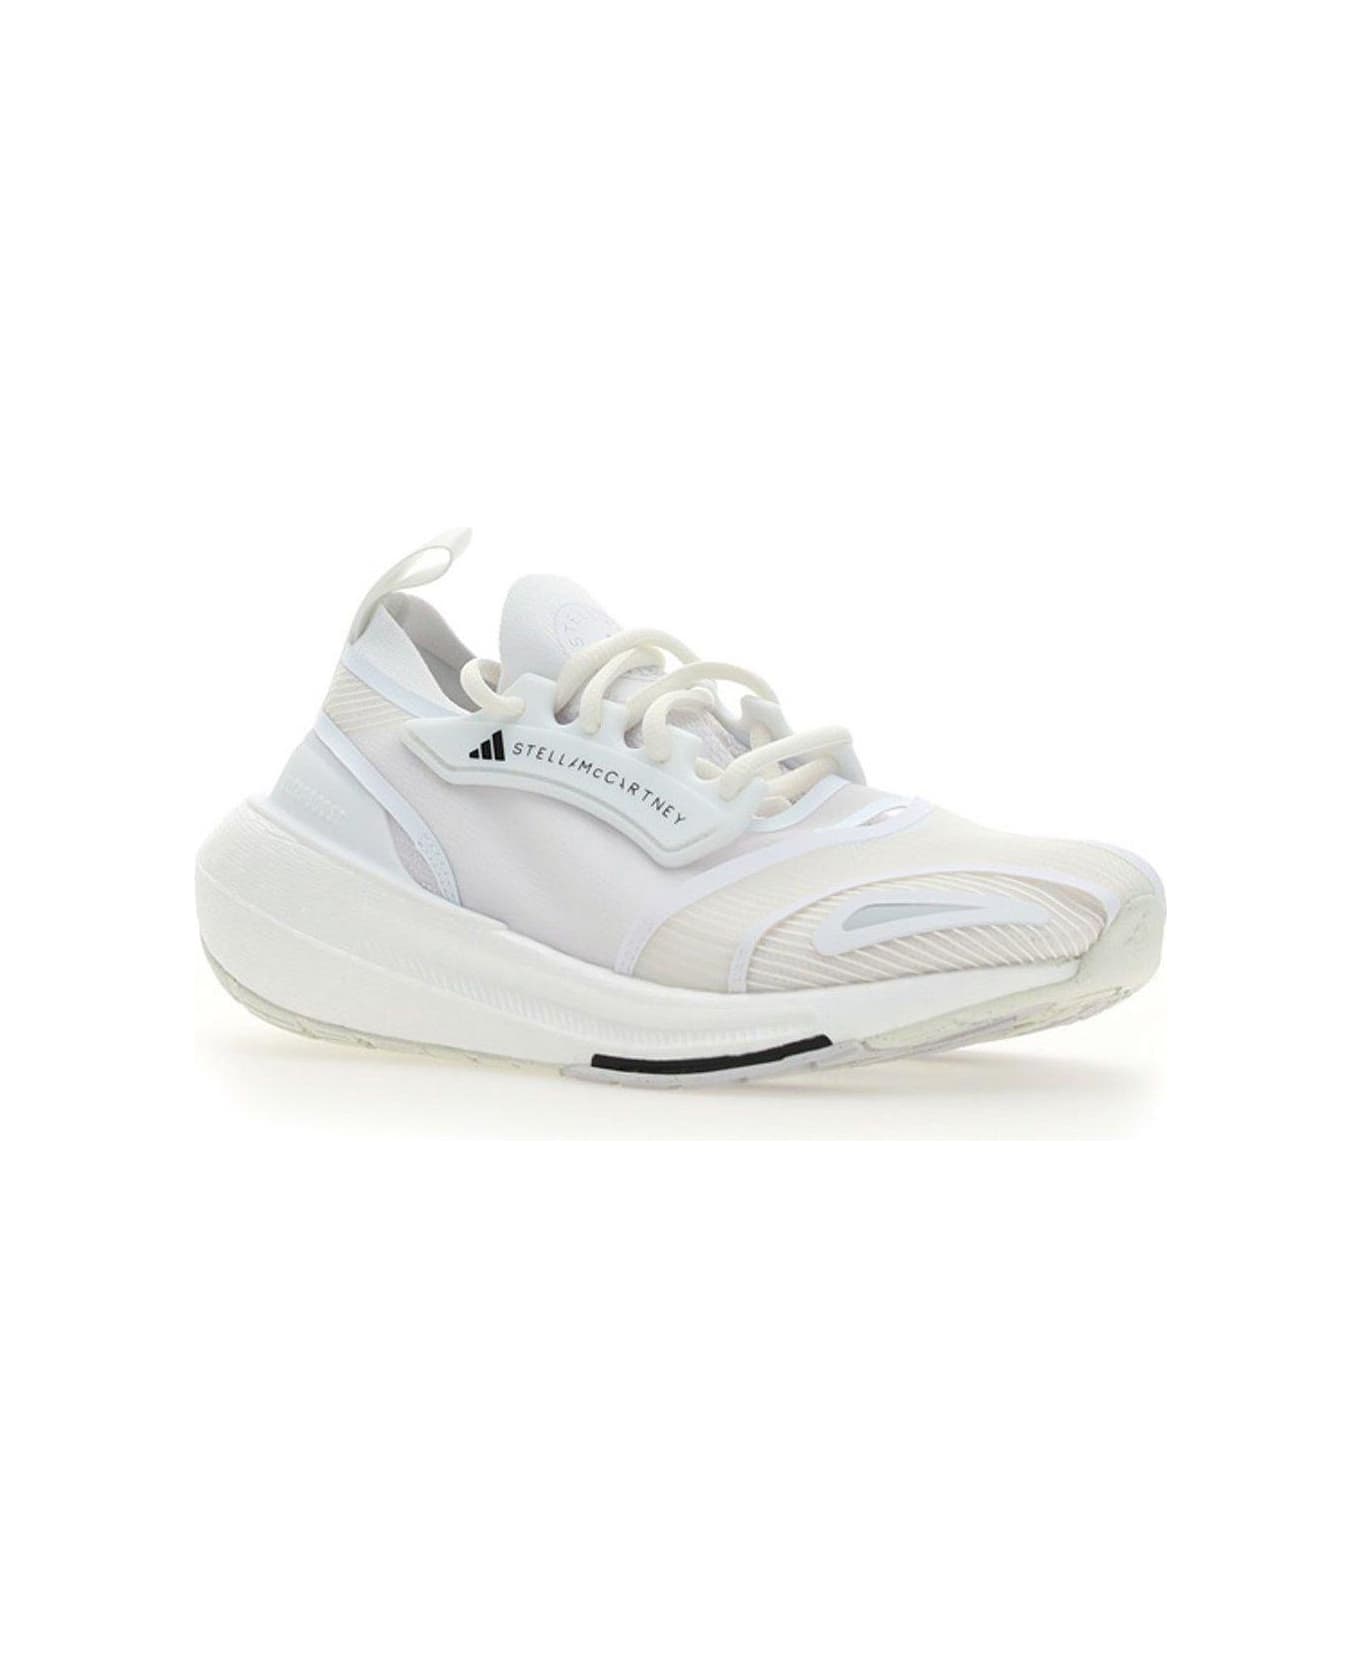 Adidas by Stella McCartney Ultraboost Light Lace-up Sneakers - White スニーカー